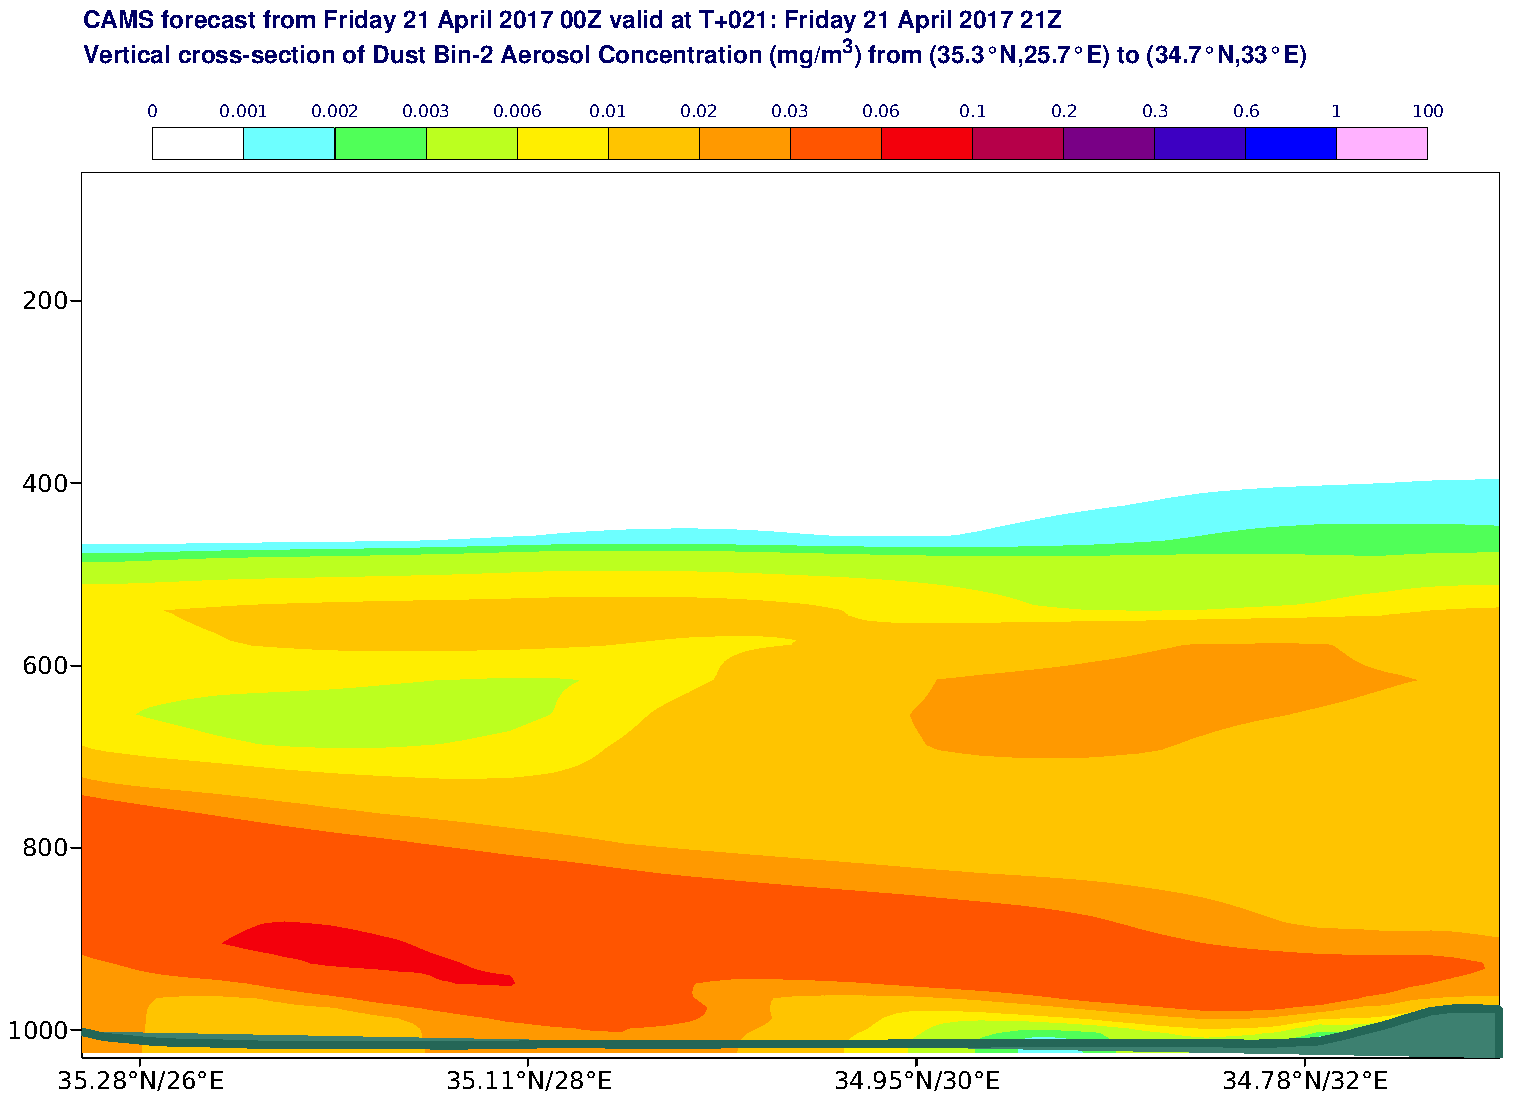 Vertical cross-section of Dust Bin-2 Aerosol Concentration (mg/m3) valid at T21 - 2017-04-21 21:00